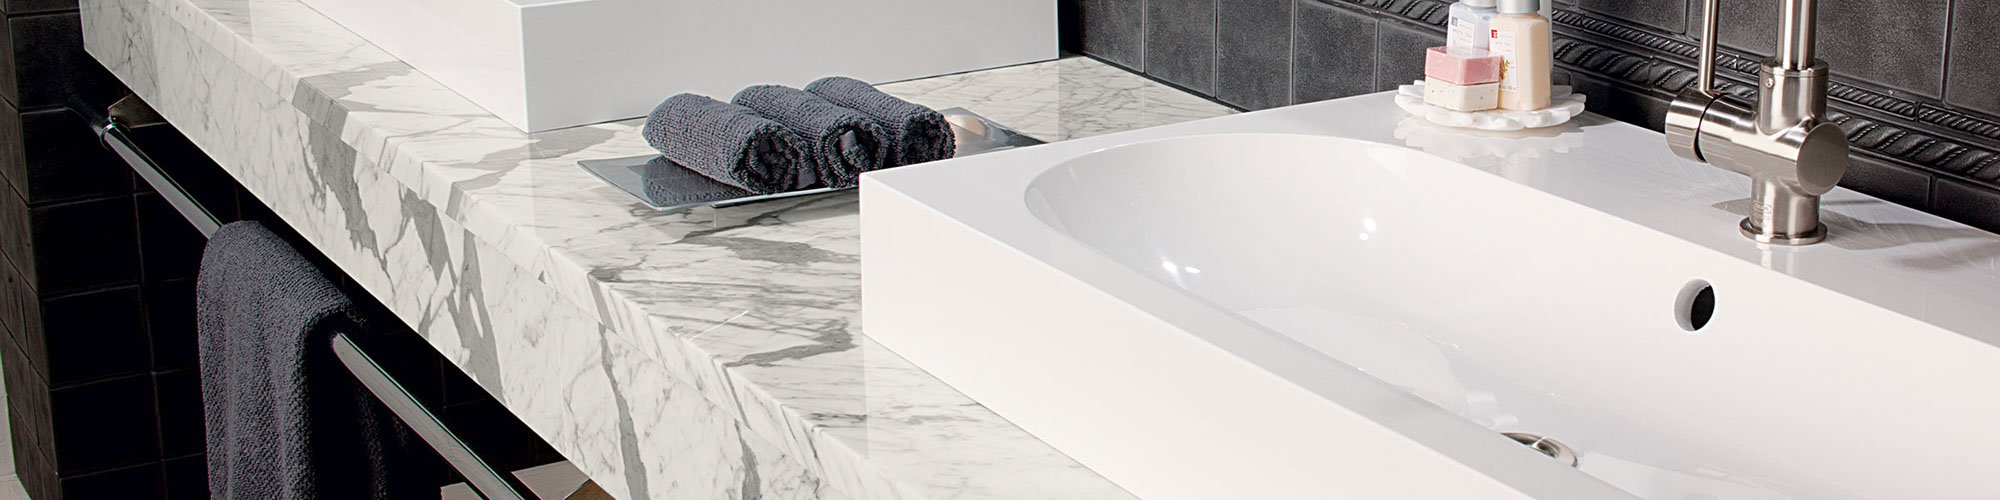 Close up of white with gray veined marble bathroom vanity countertop with dual vessel sinks.